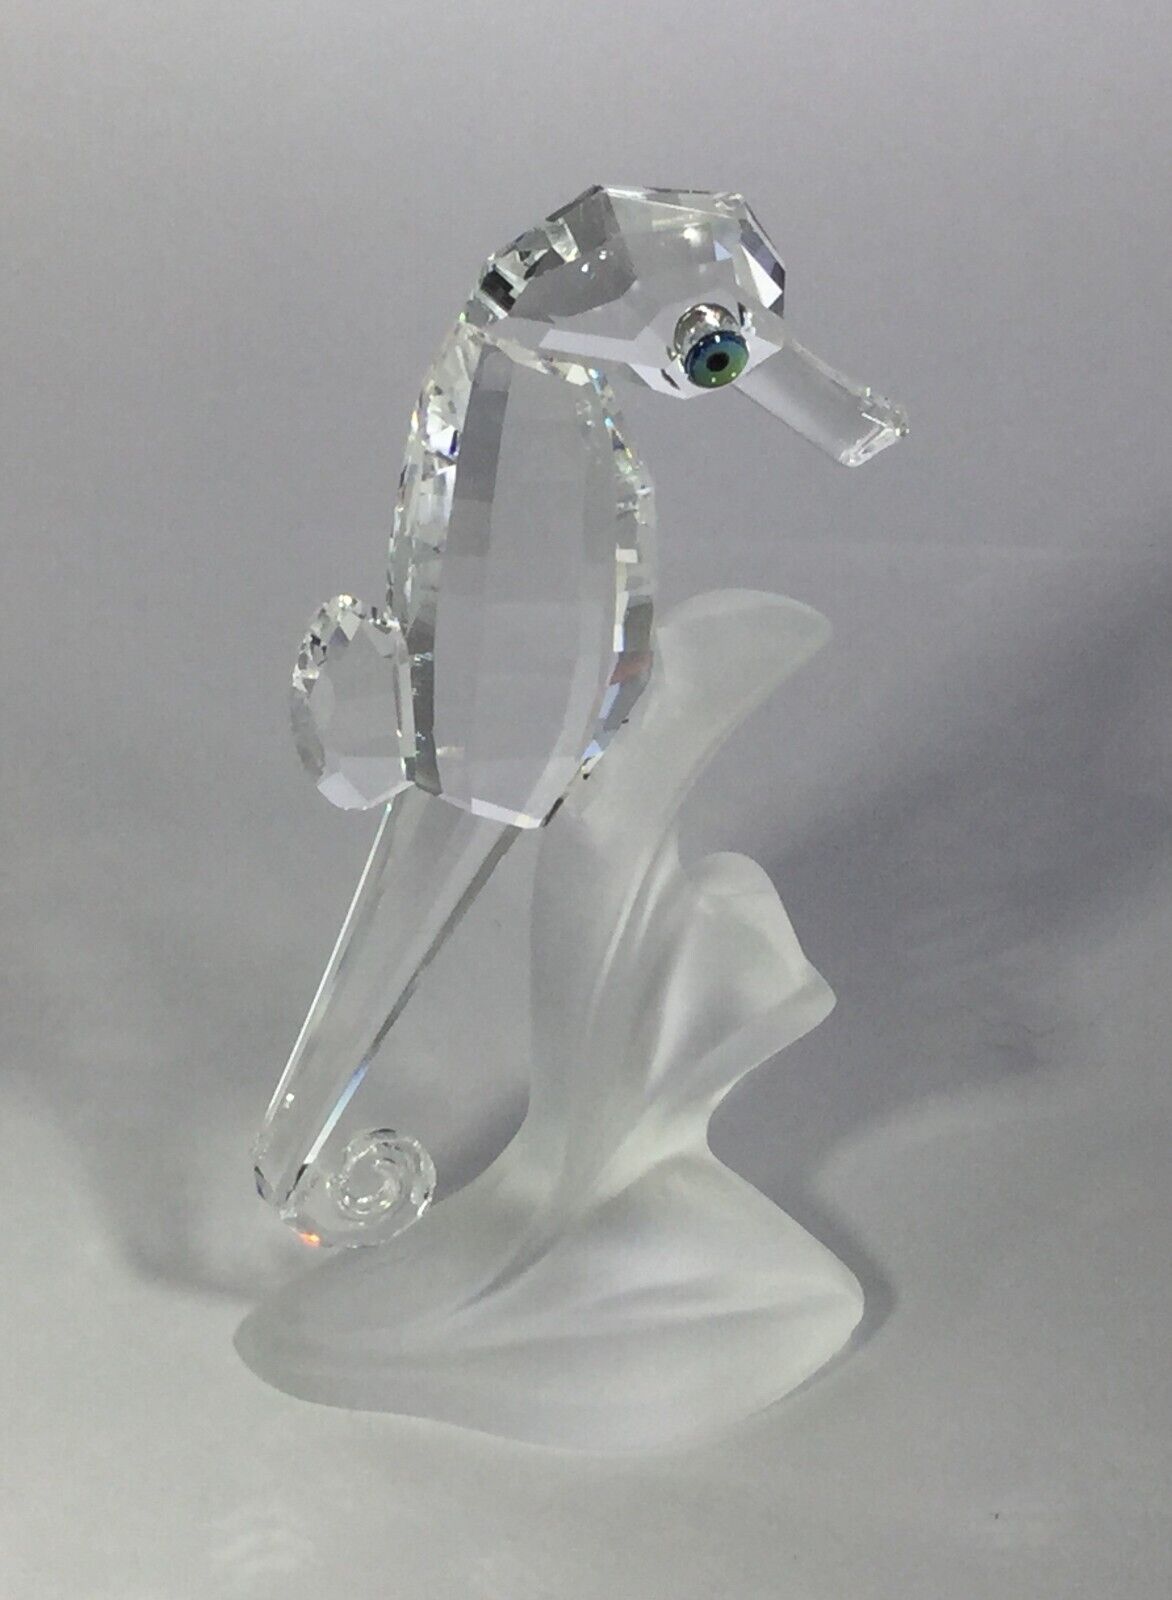 Swarovski Crystal Figurine Seahorse with Frosted Base #7614